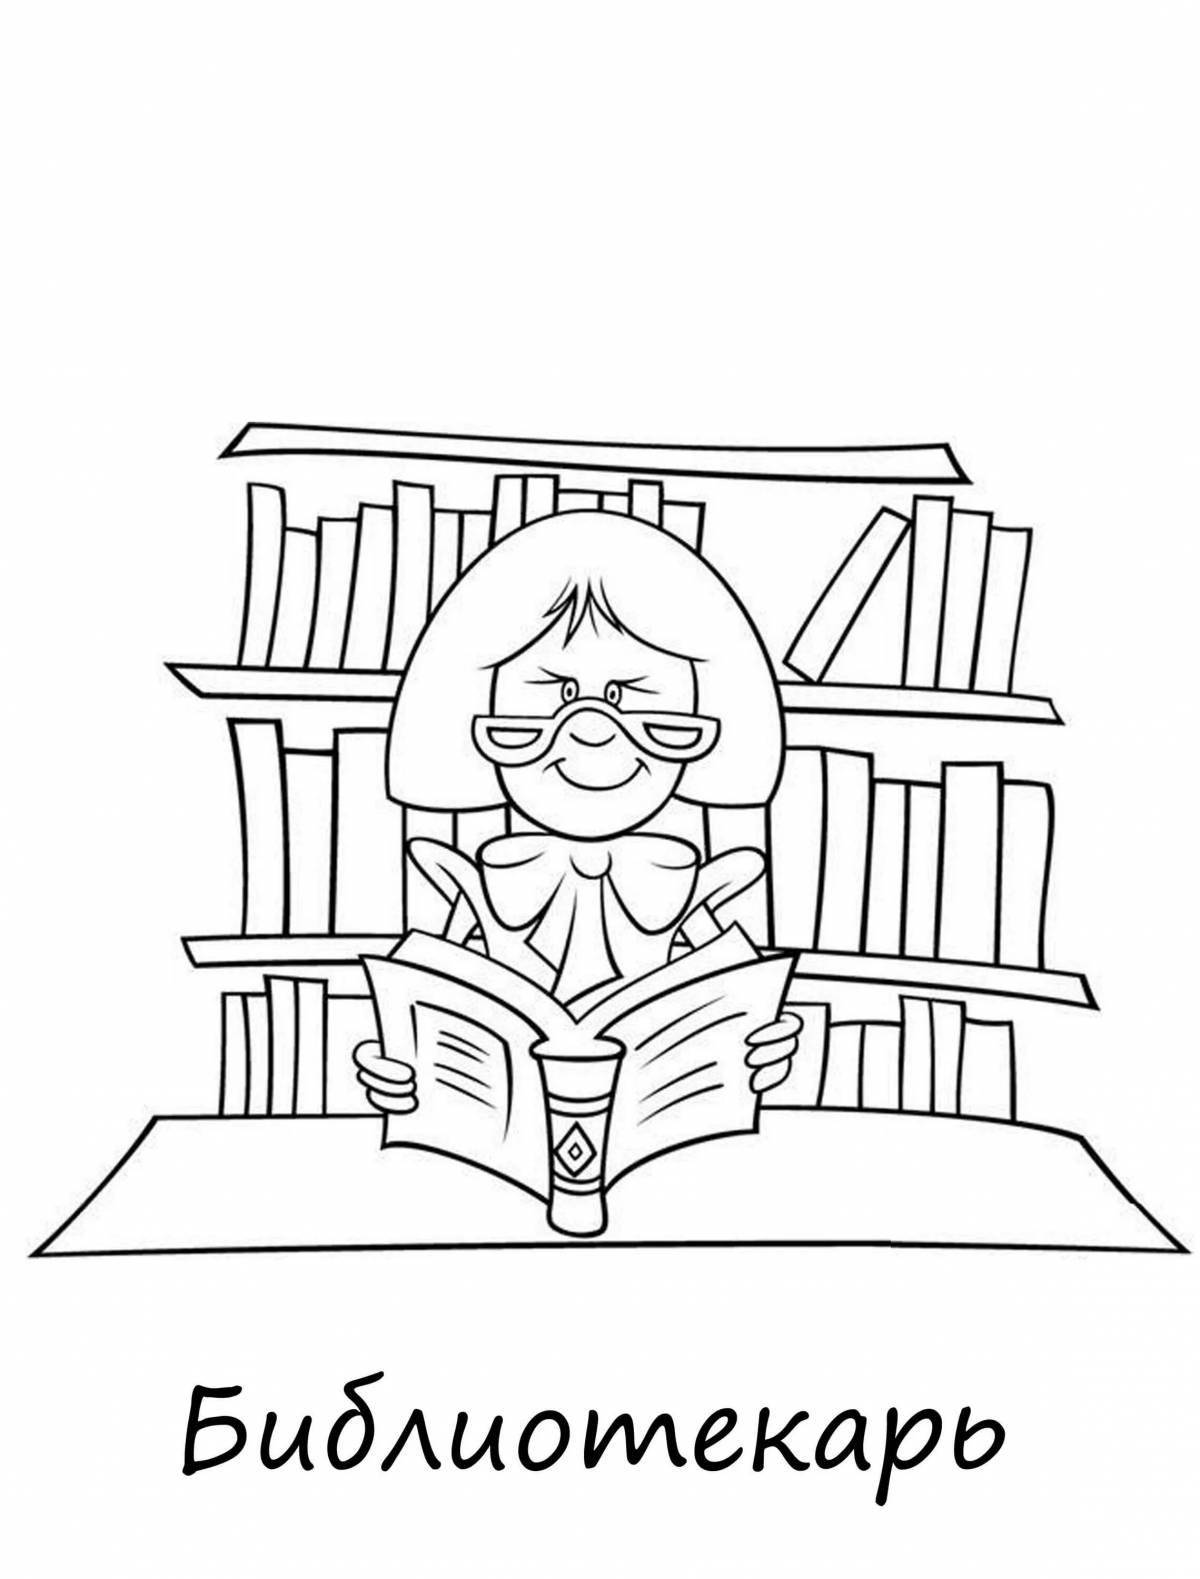 Coloring page of the bewitching librarian